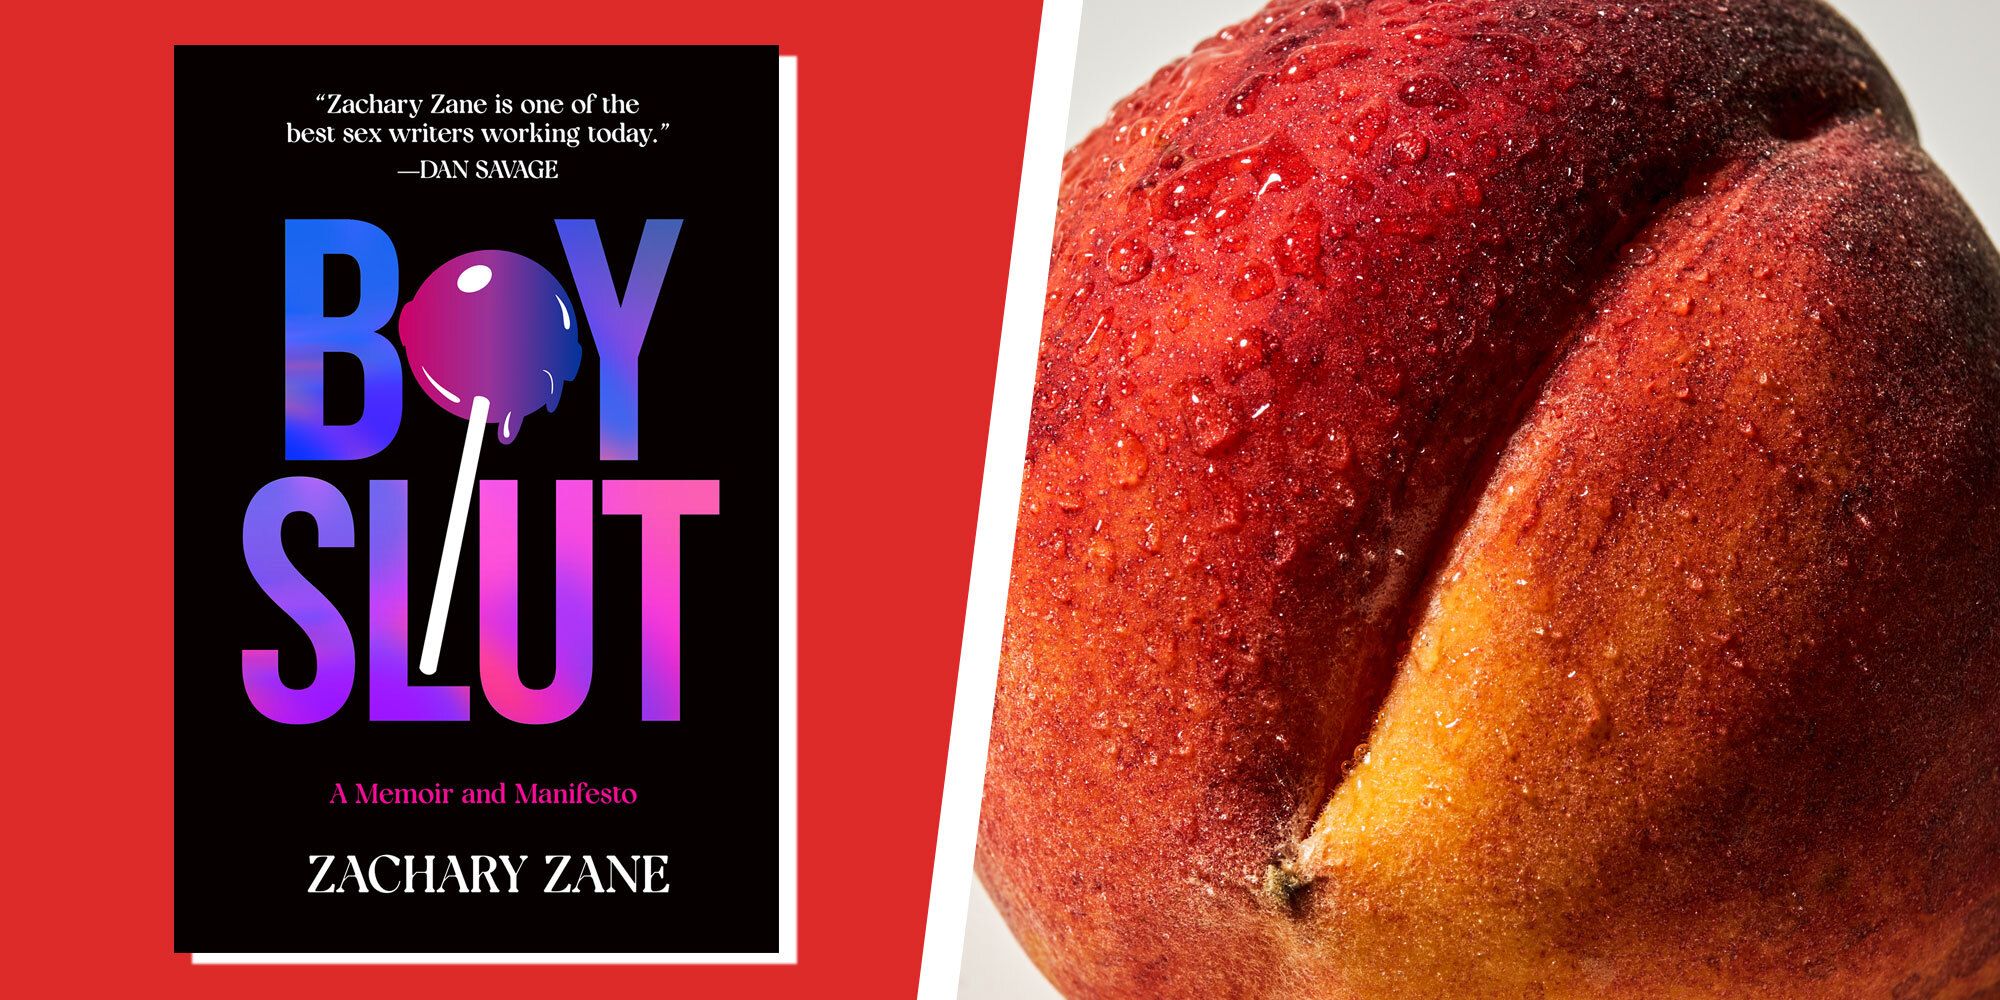 side by side images of boyslut by zachary zane, and a peach that looks like a butt